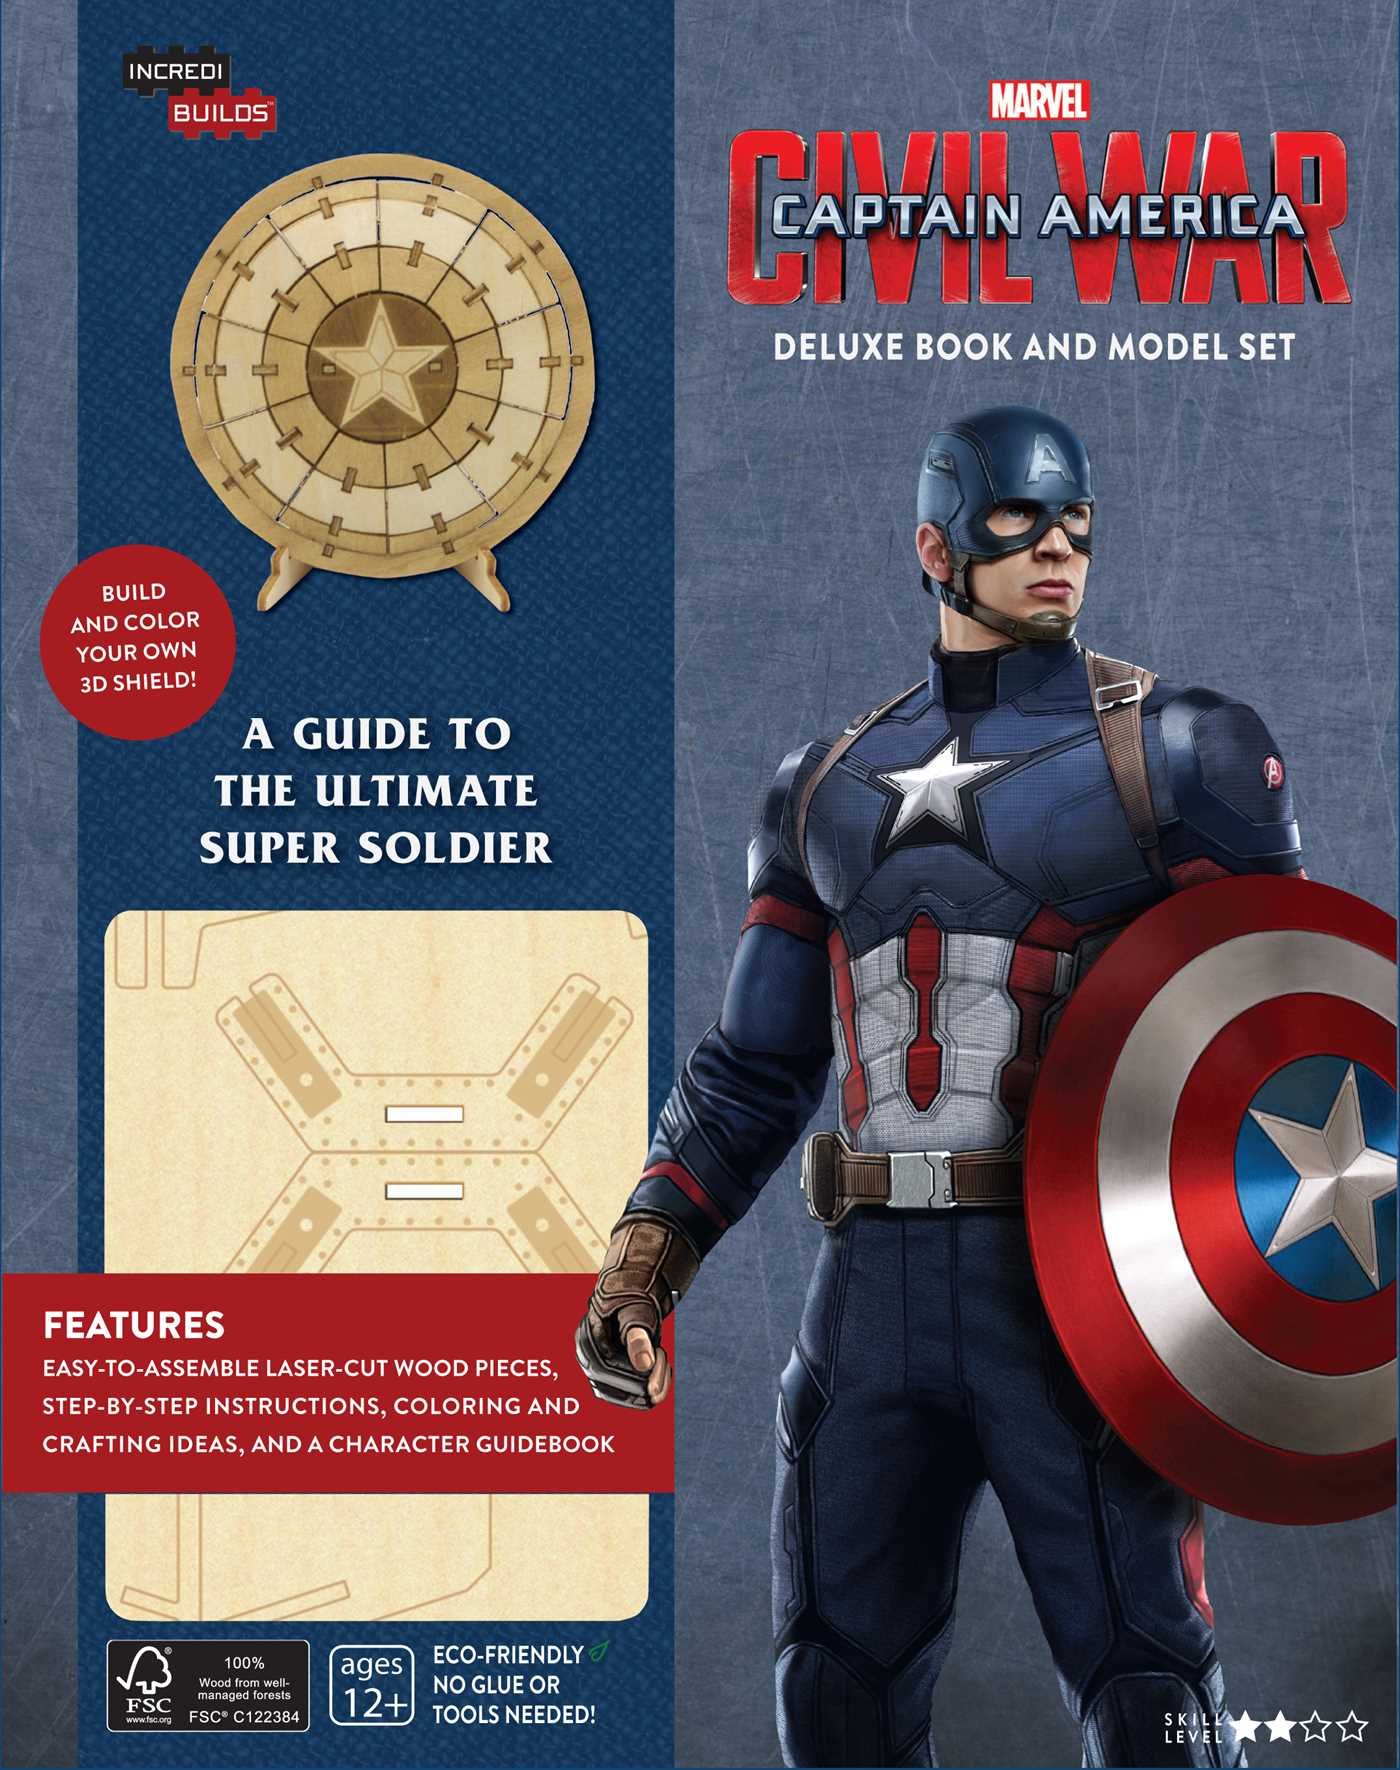 IncrediBuilds - Marvel&#039;s Captain America: Civil War Deluxe Book and Model Set: A Guide to the Ultimate Super Soldier